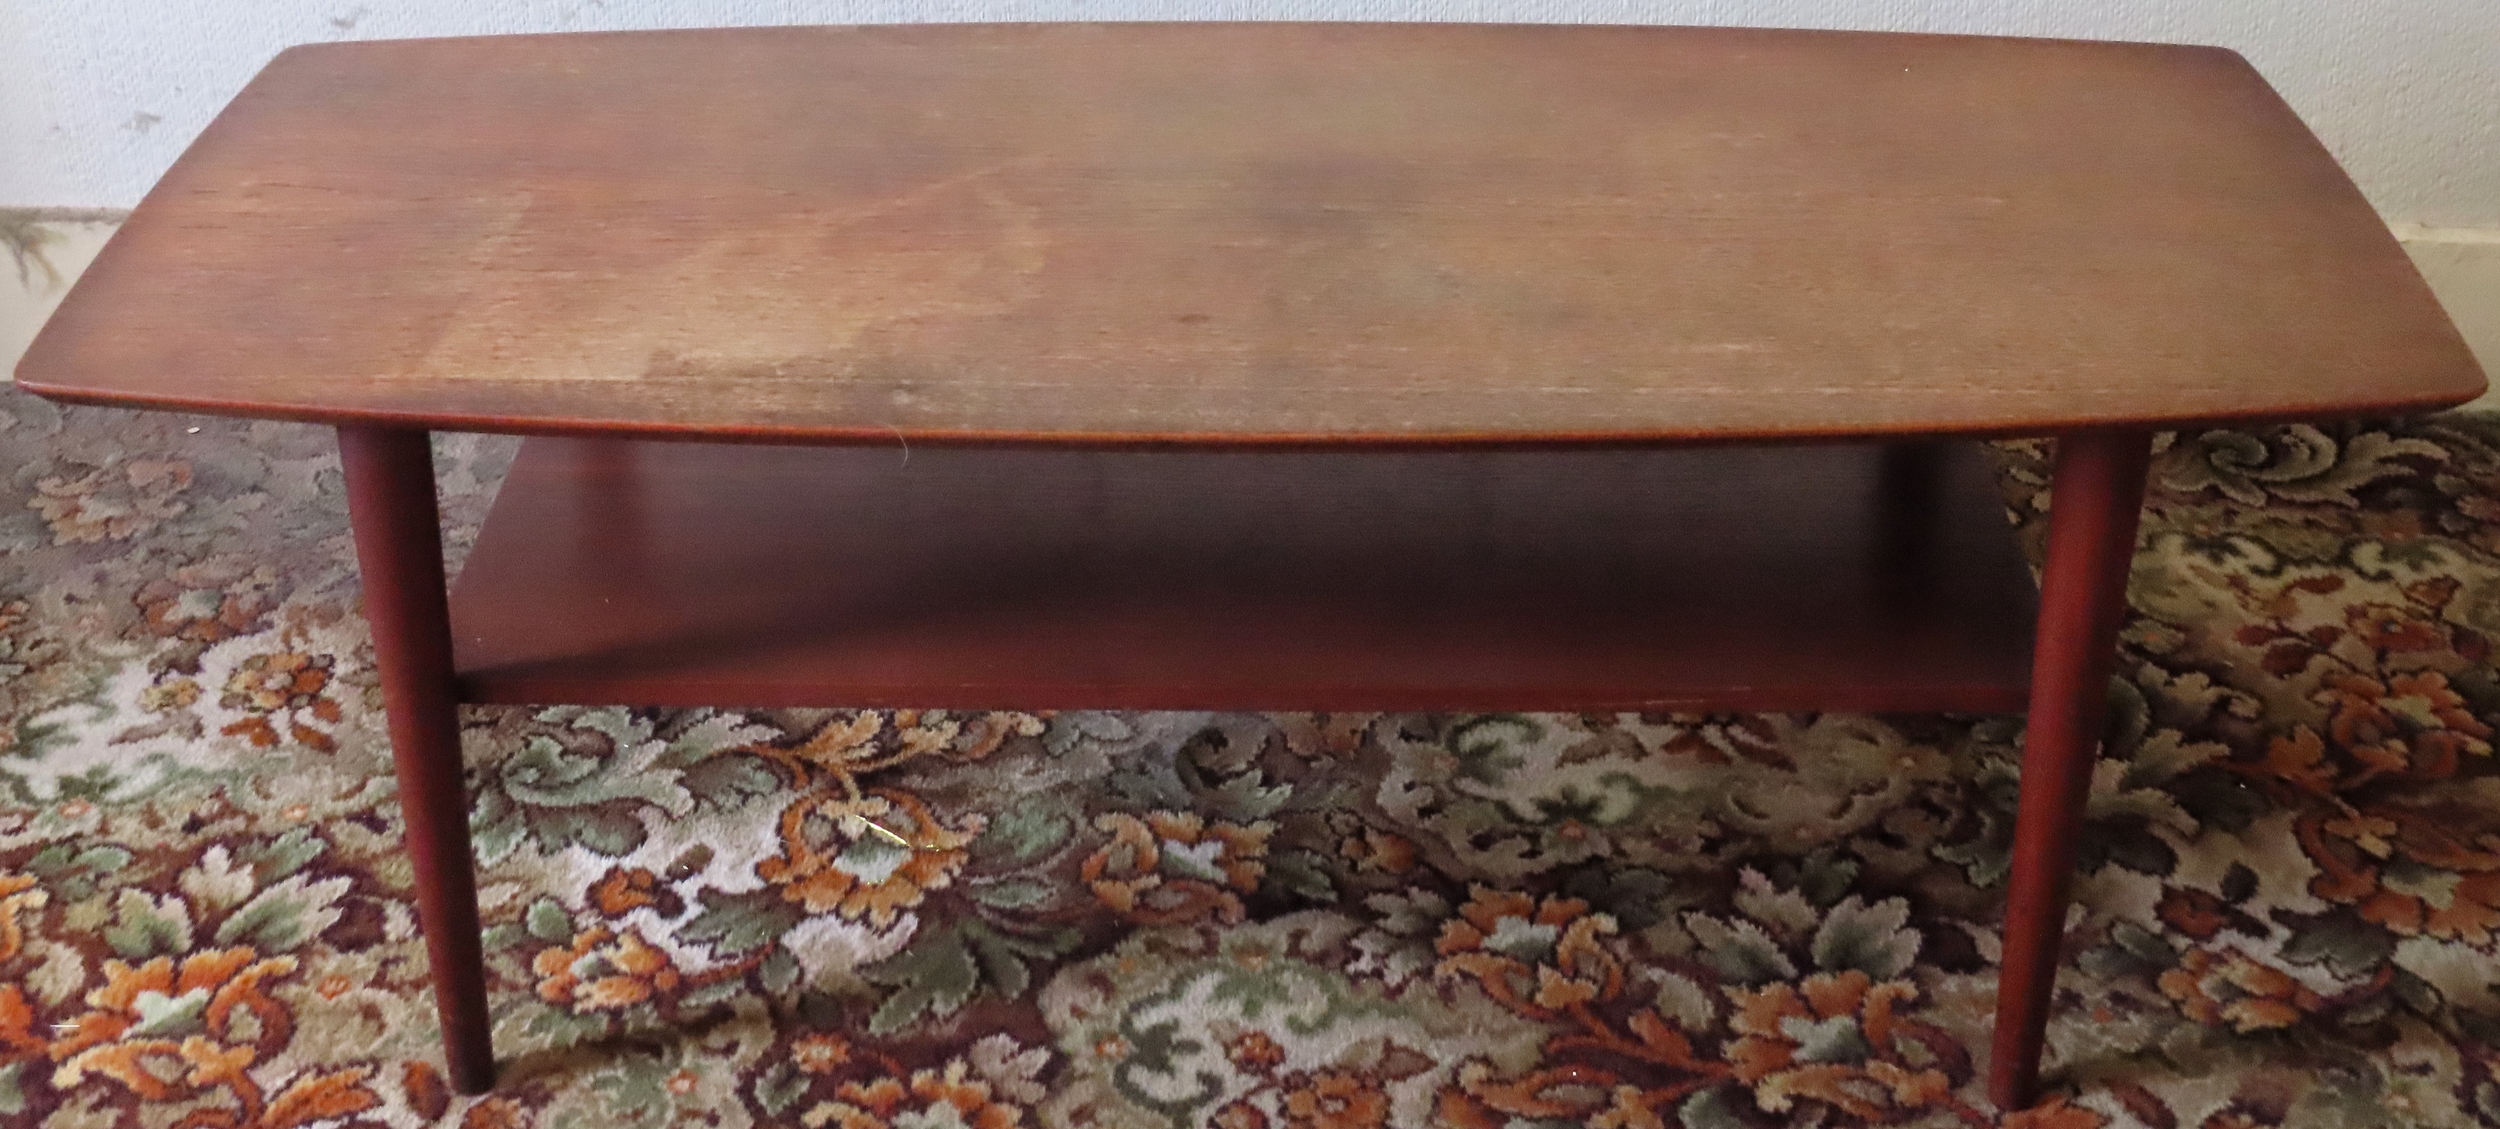 G Plan style 1970's coffee table. Approx. 36cm H x 122cm W x 51cm D Used condition, scuffs and